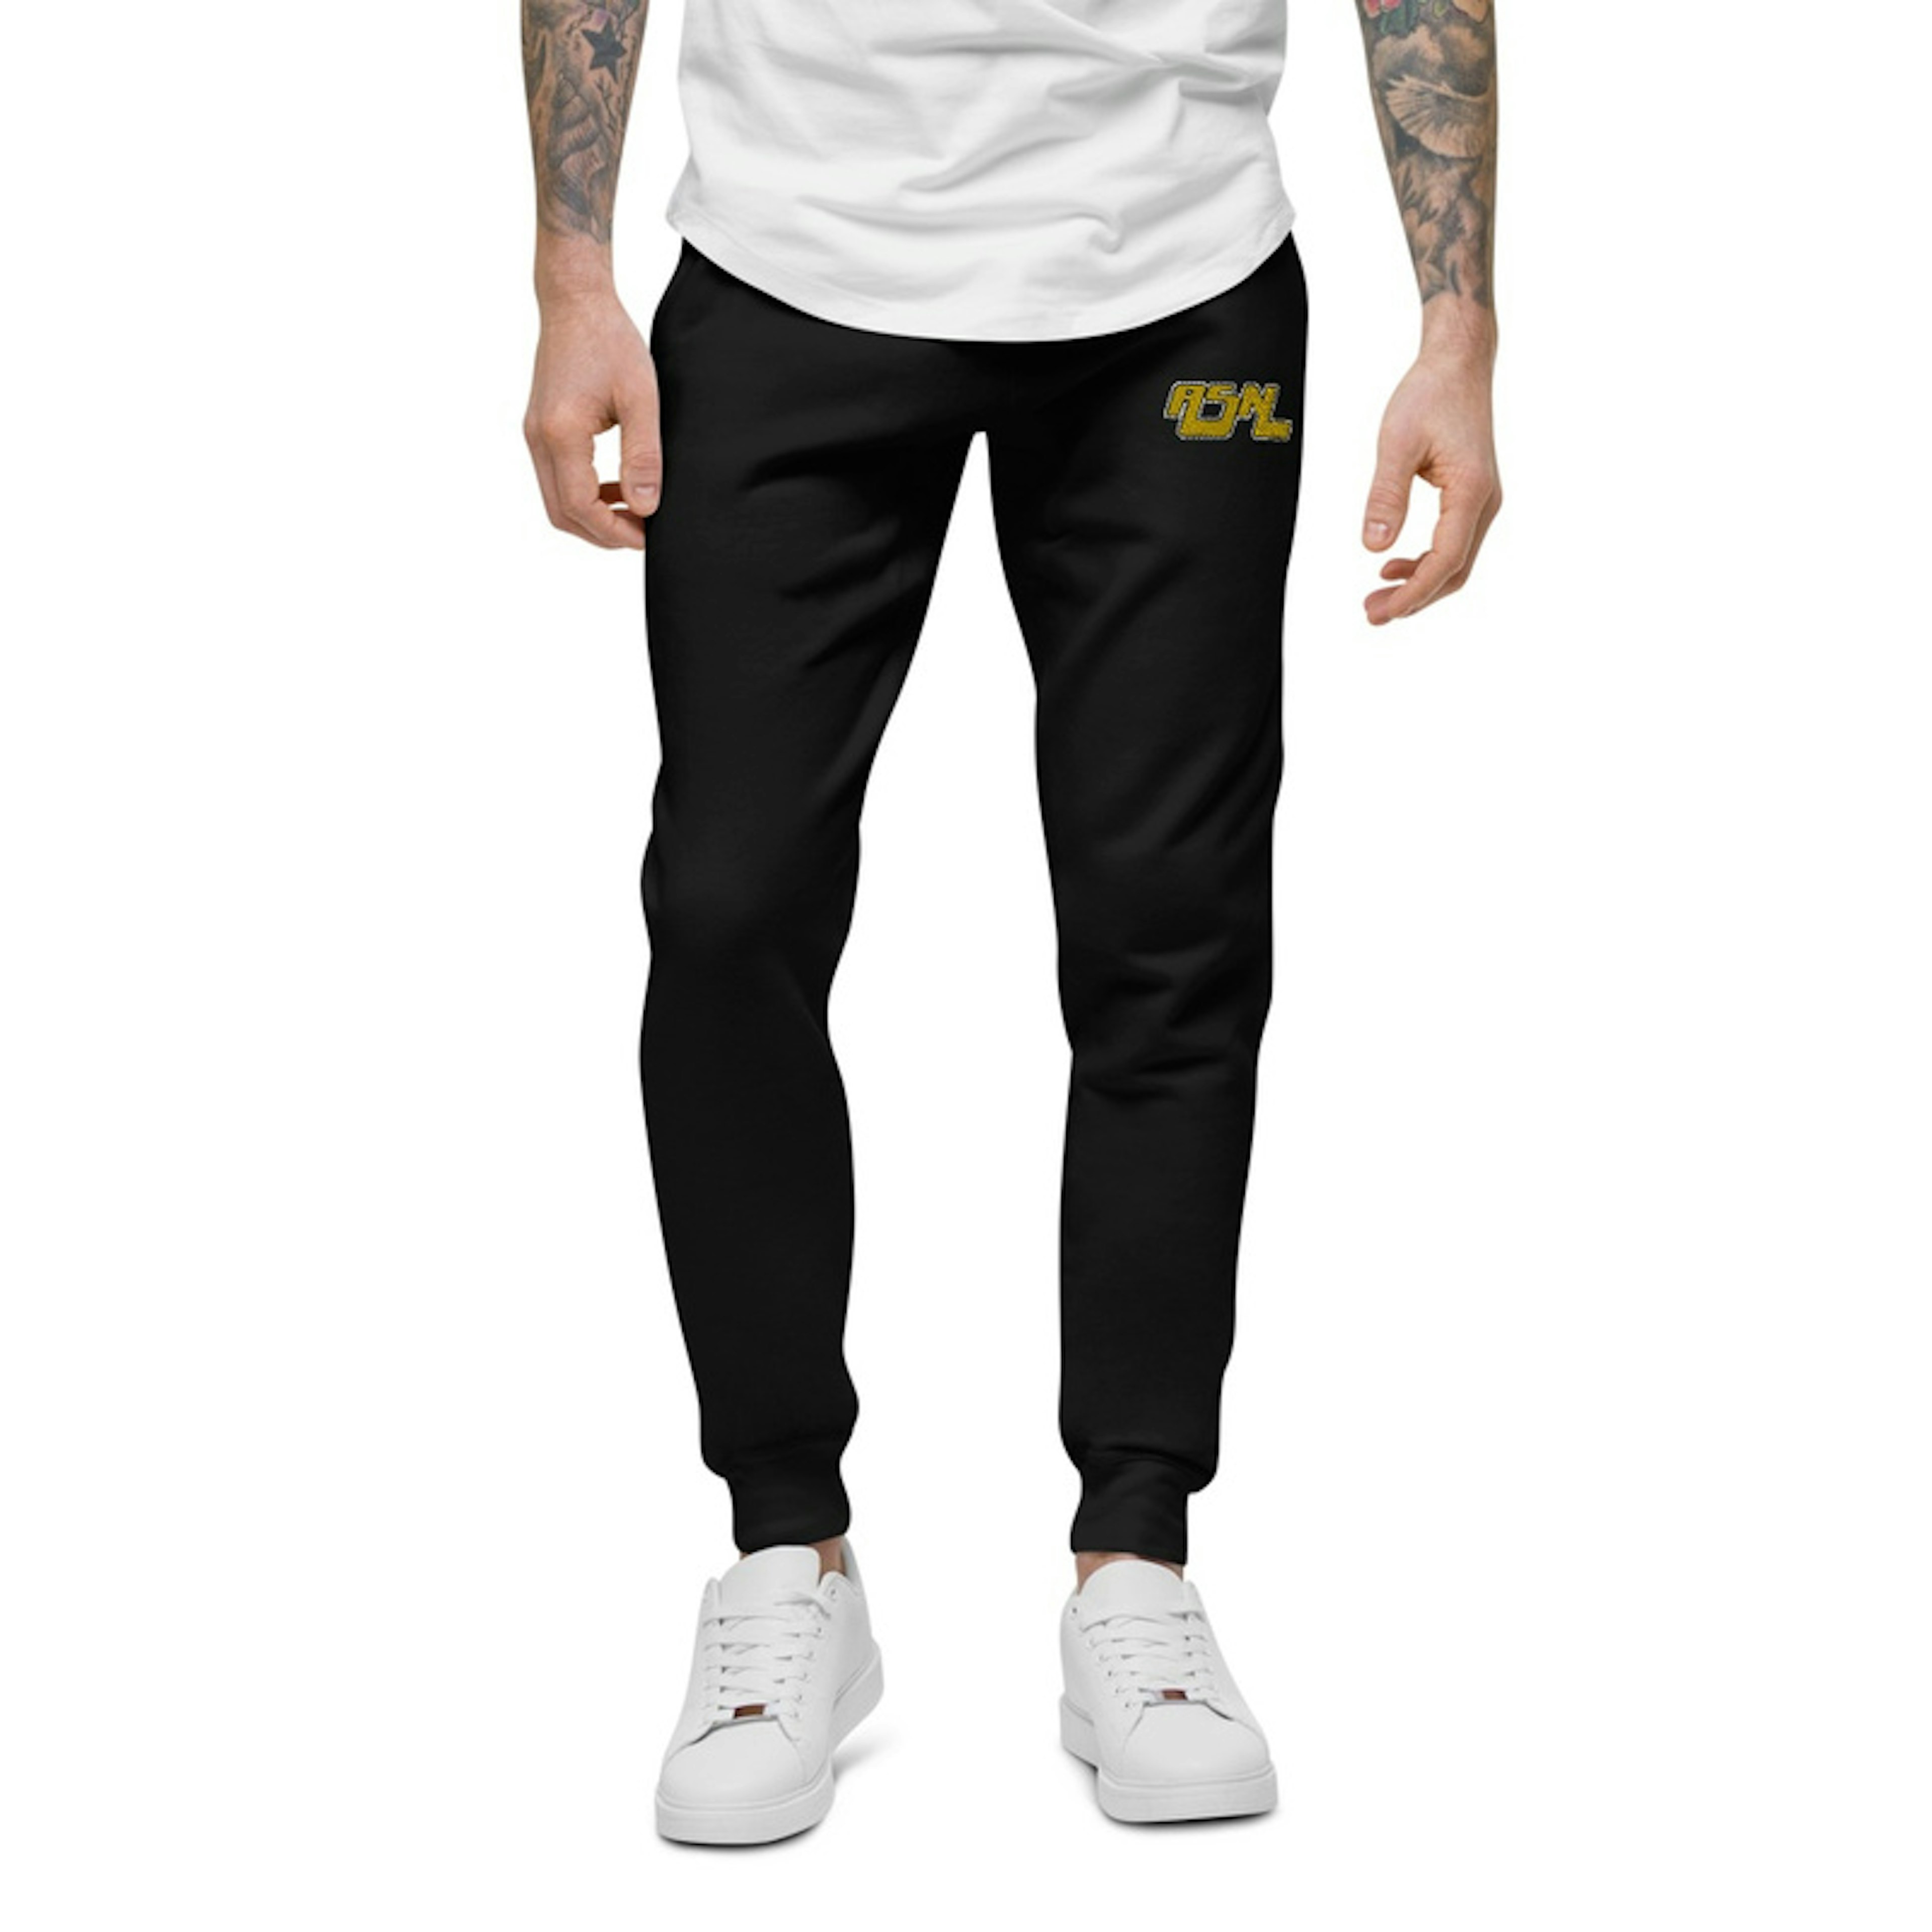 ASN Embroidered Sweat Pants 